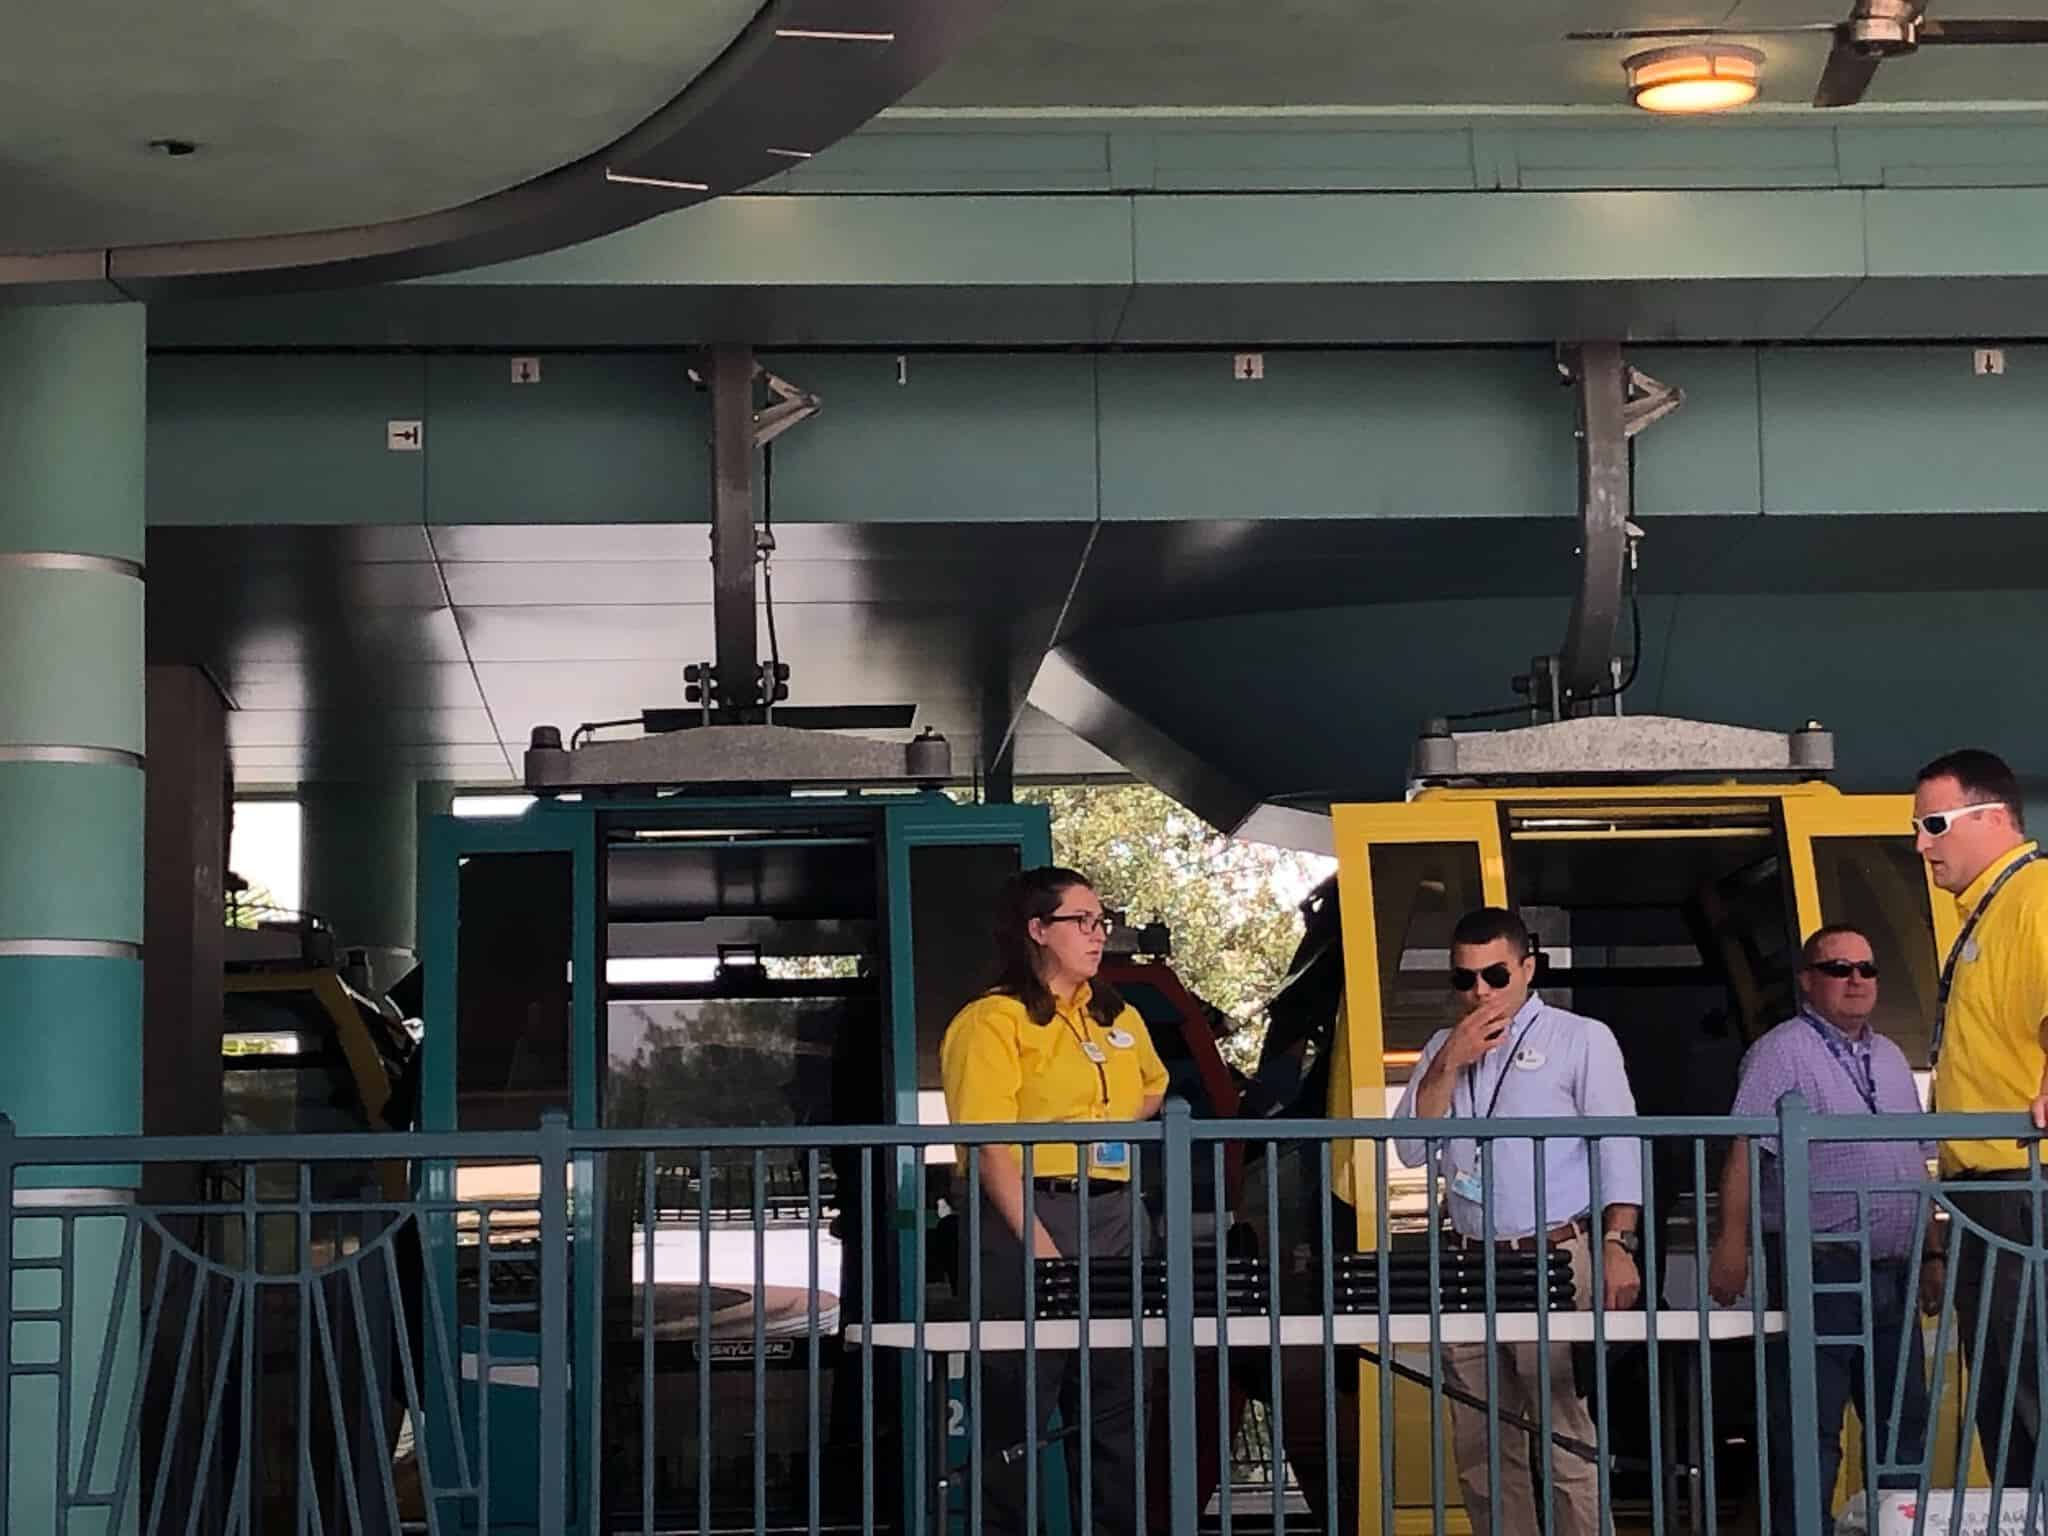 Cast Members are already being trained to operate the Disney Skyliner